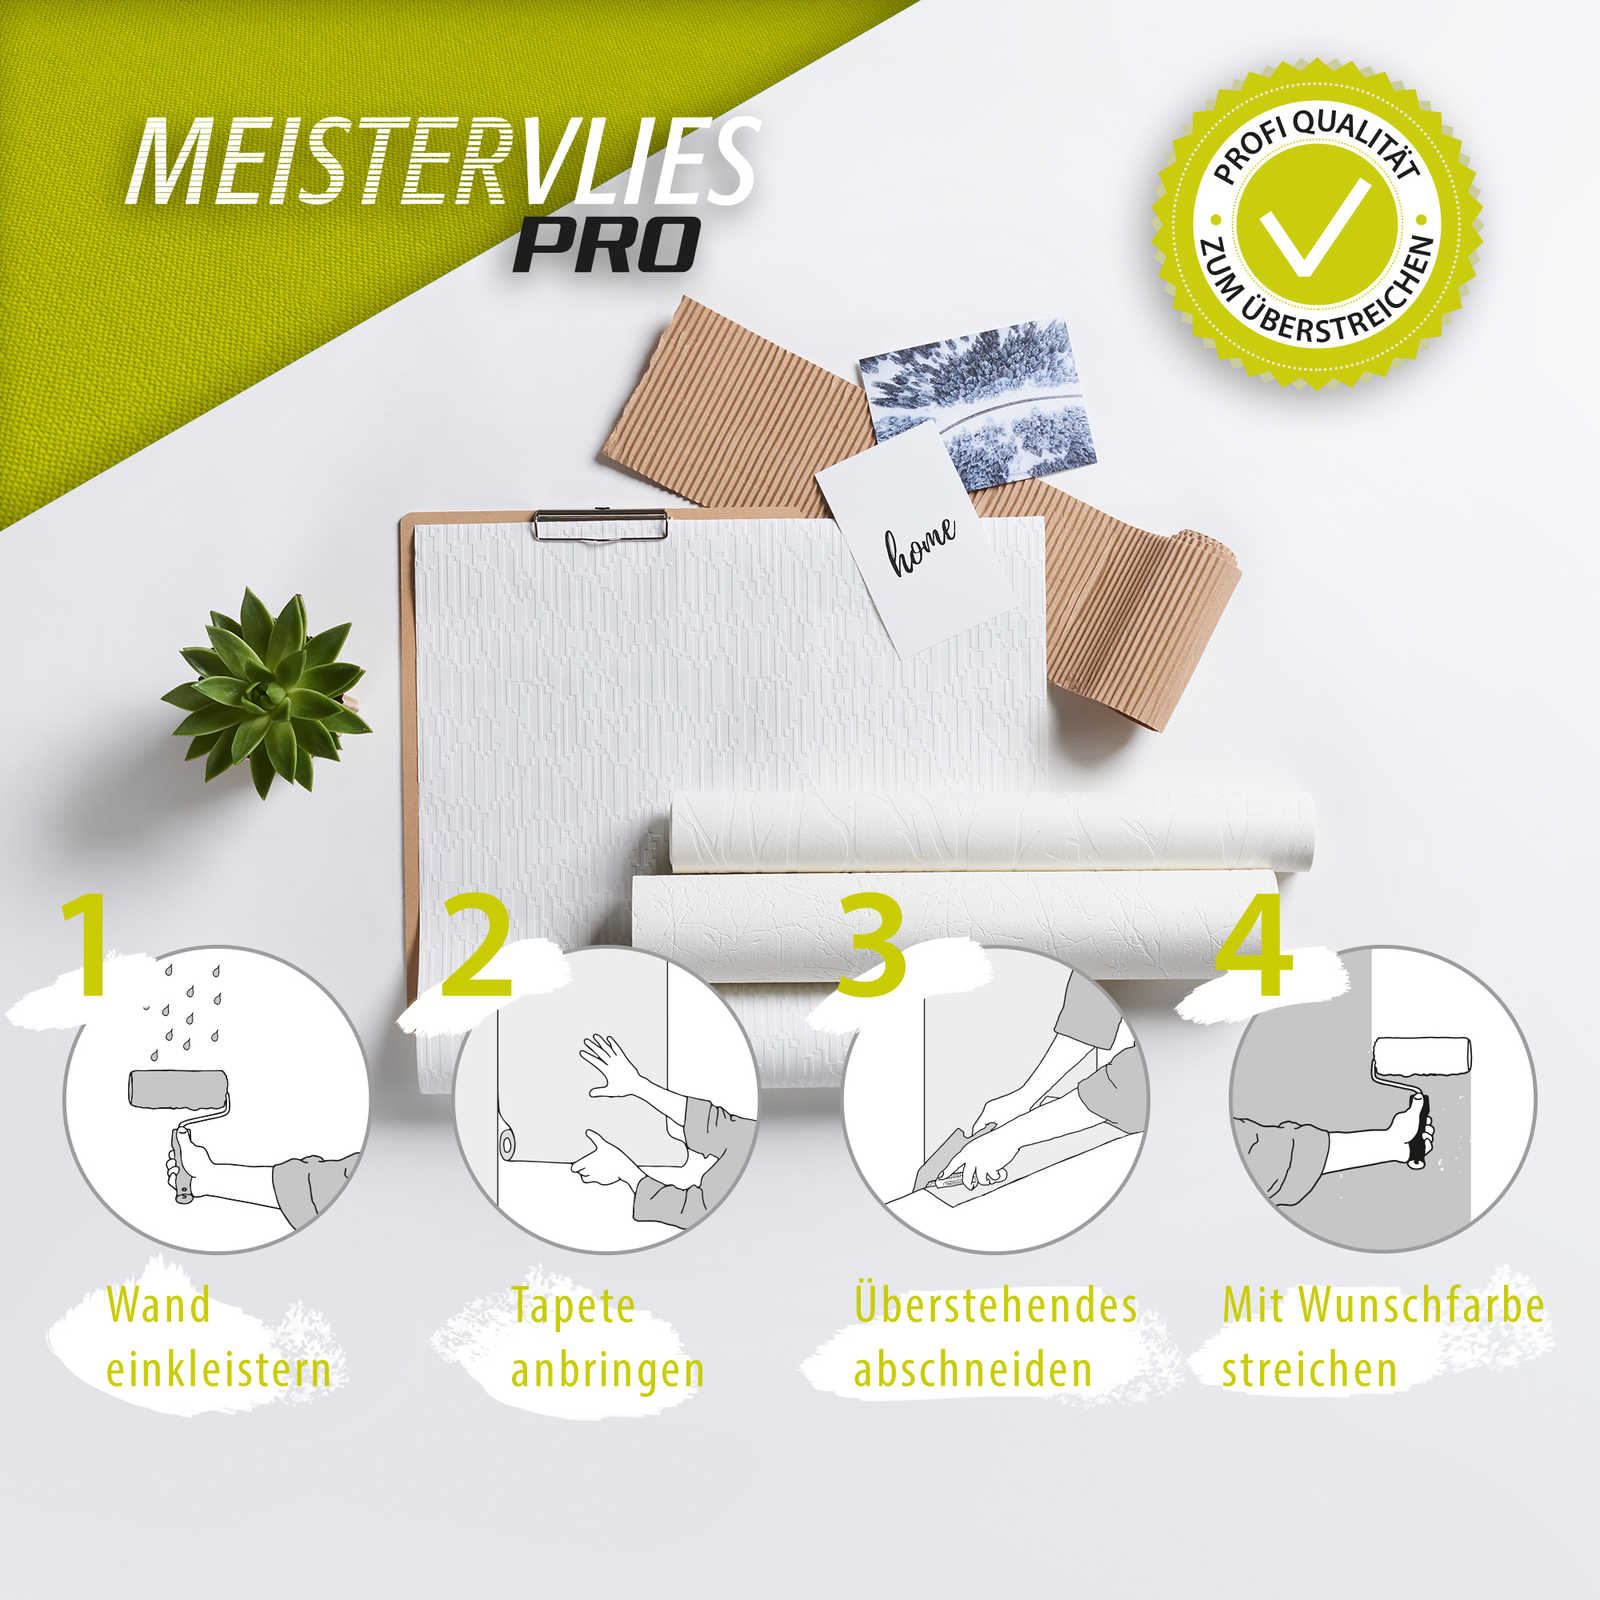             Meistervlies wallpaper with flat structure pattern - white
        